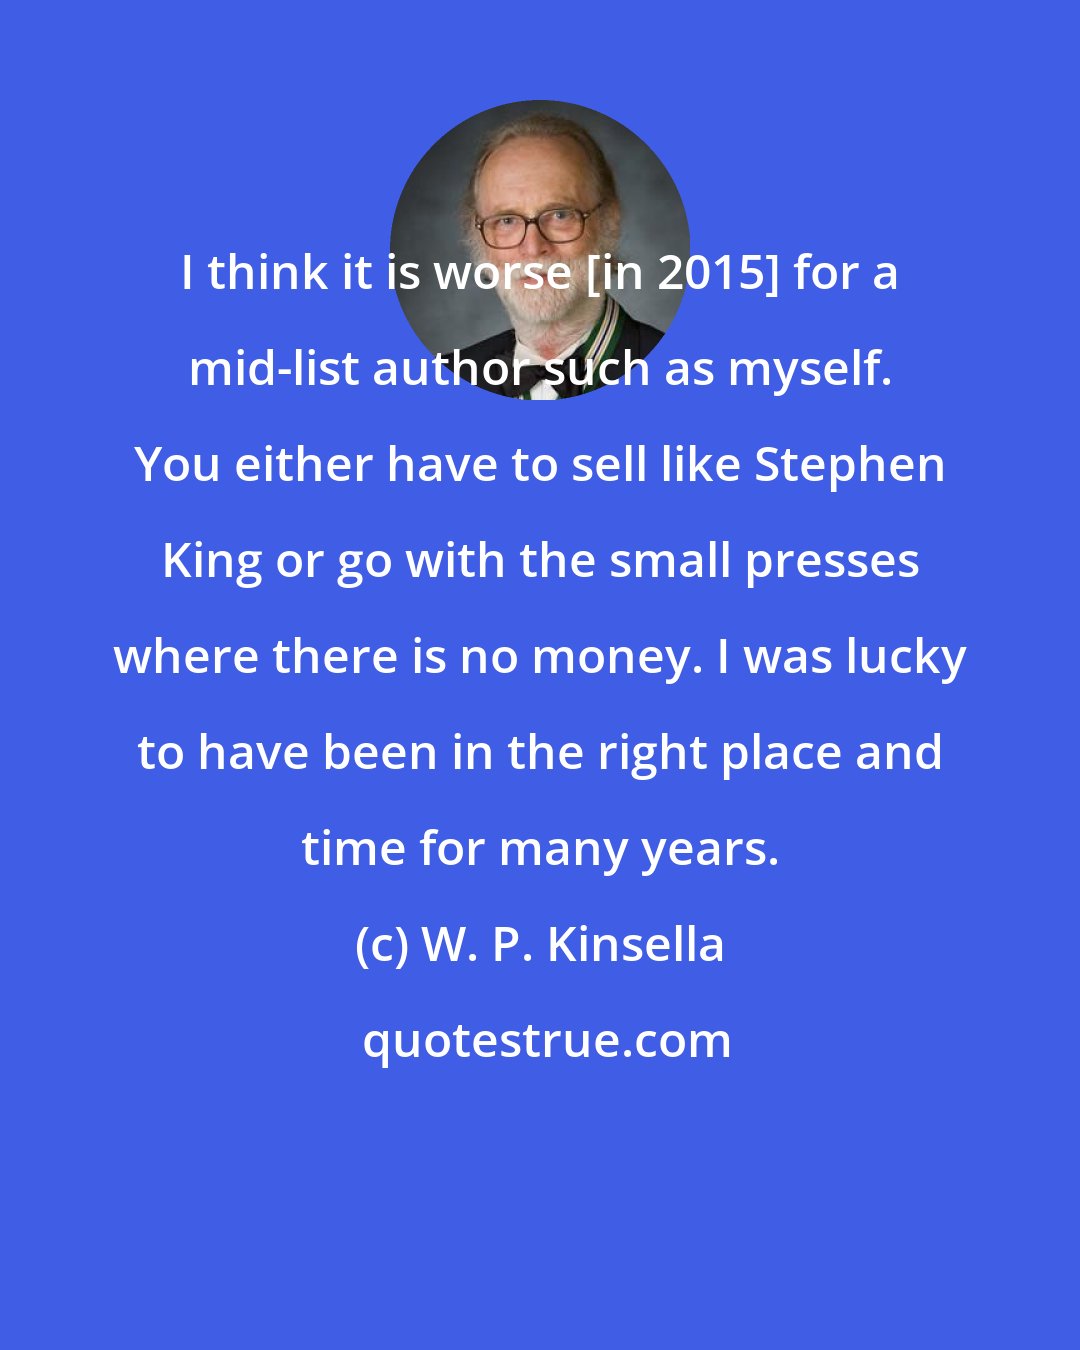 W. P. Kinsella: I think it is worse [in 2015] for a mid-list author such as myself. You either have to sell like Stephen King or go with the small presses where there is no money. I was lucky to have been in the right place and time for many years.